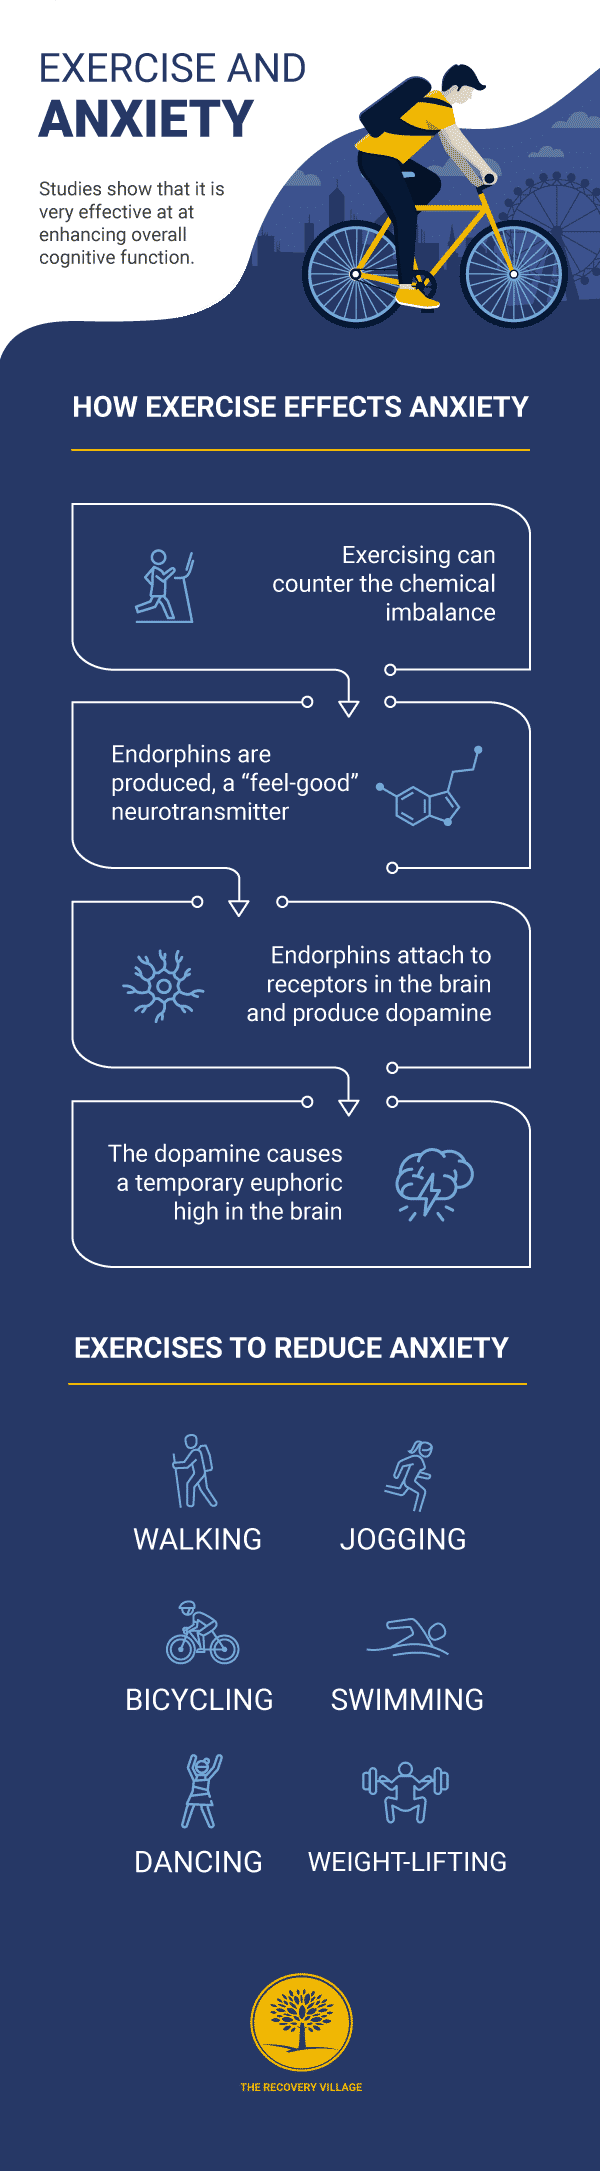 Can exercise help with anxiety?